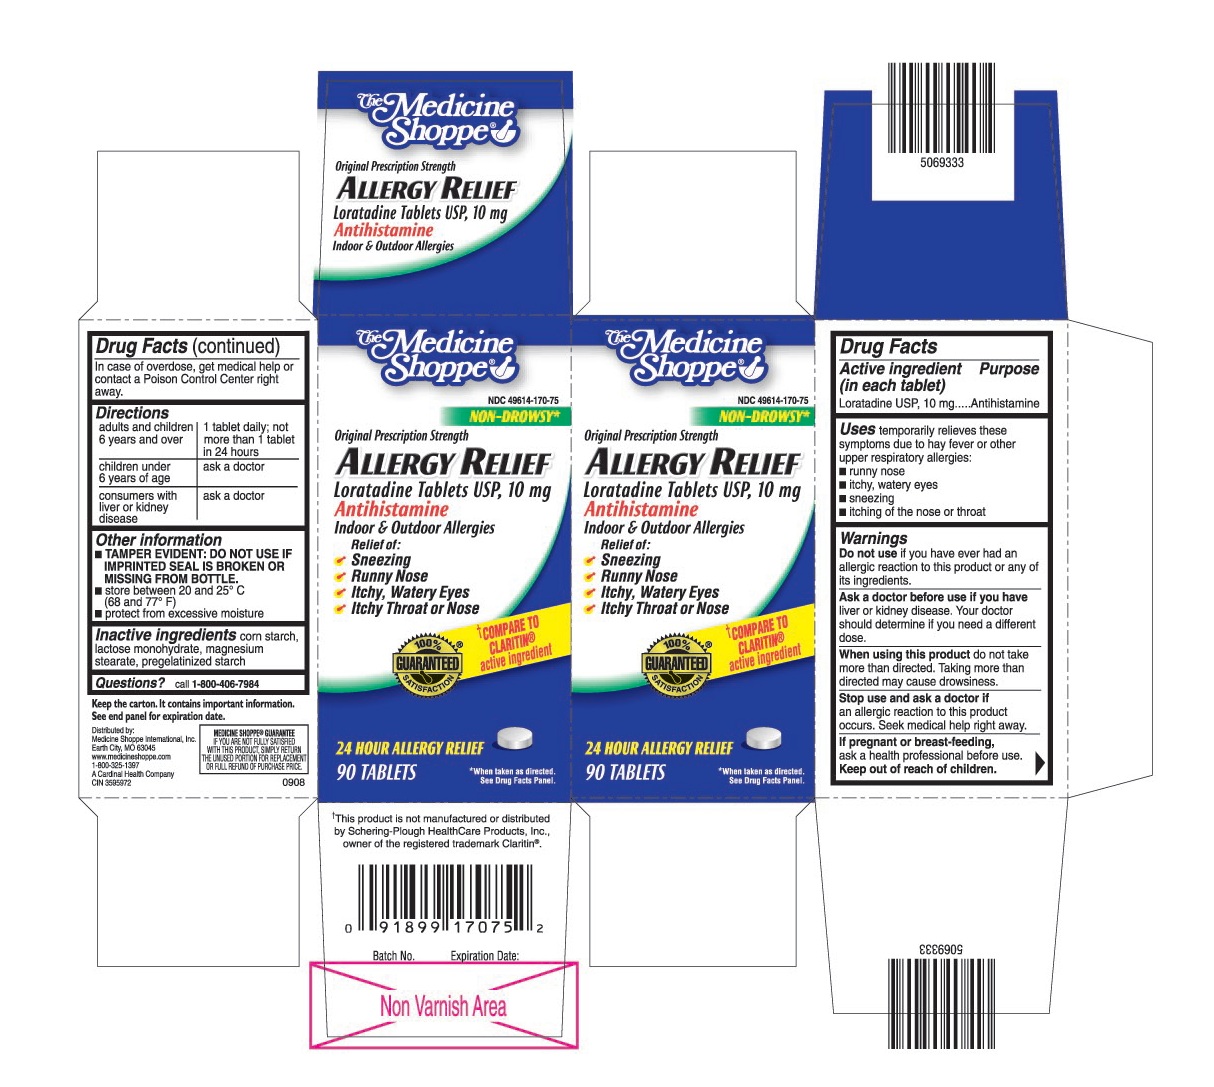 This is the 90 count bottle carton label for Loratadine Medicine Shoppe. 